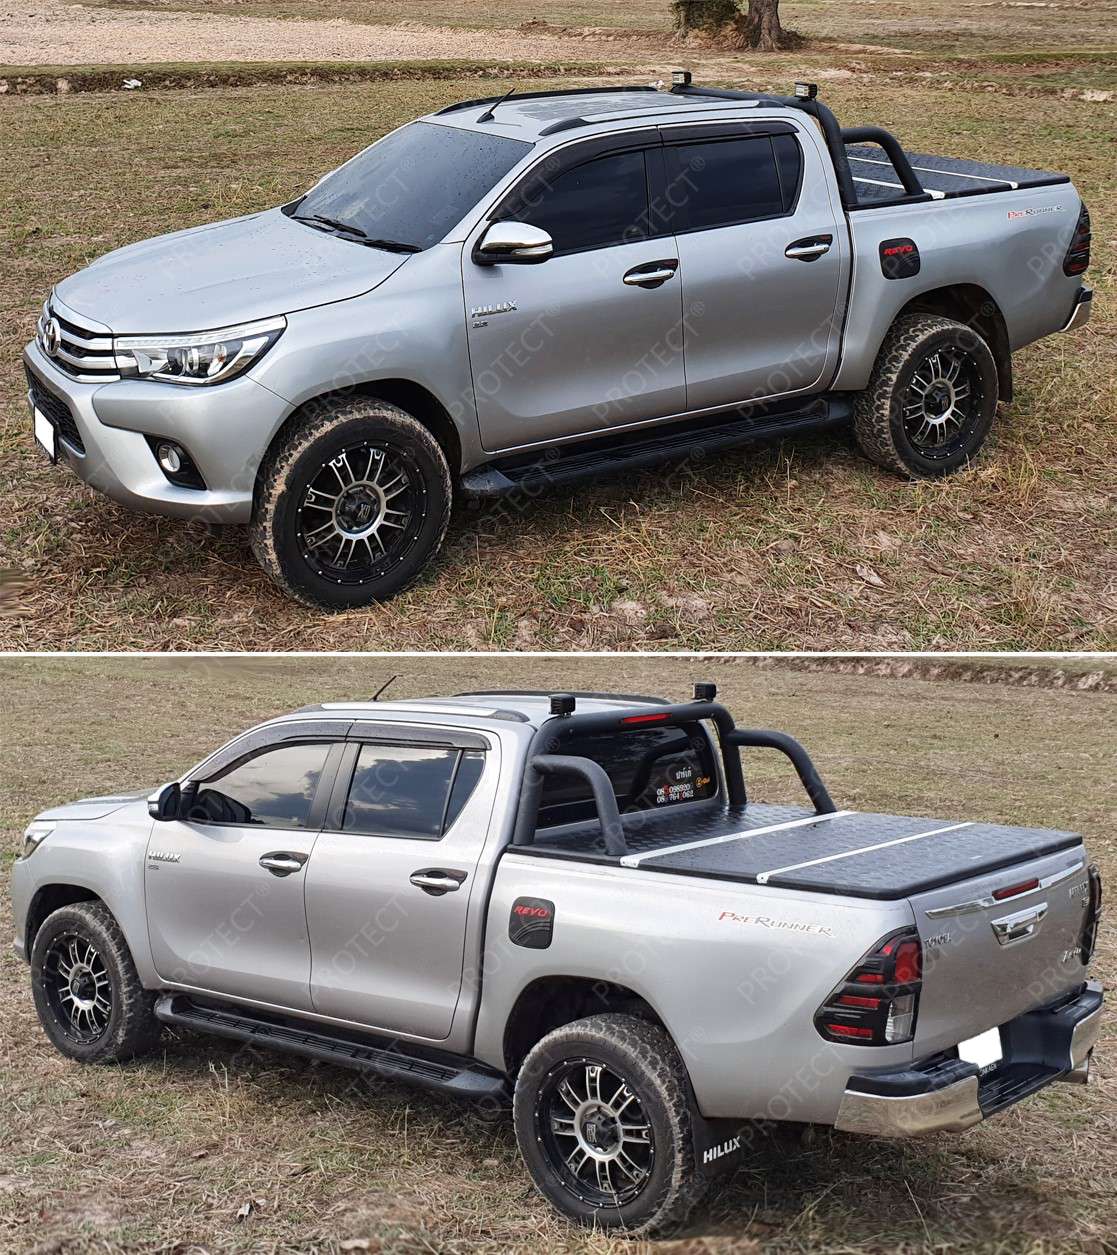 PROTECT cover foldable aluminum loading compartment cover with roll bar for Toyota Hilux Doppelkabine Bj. 2012-2022 -2